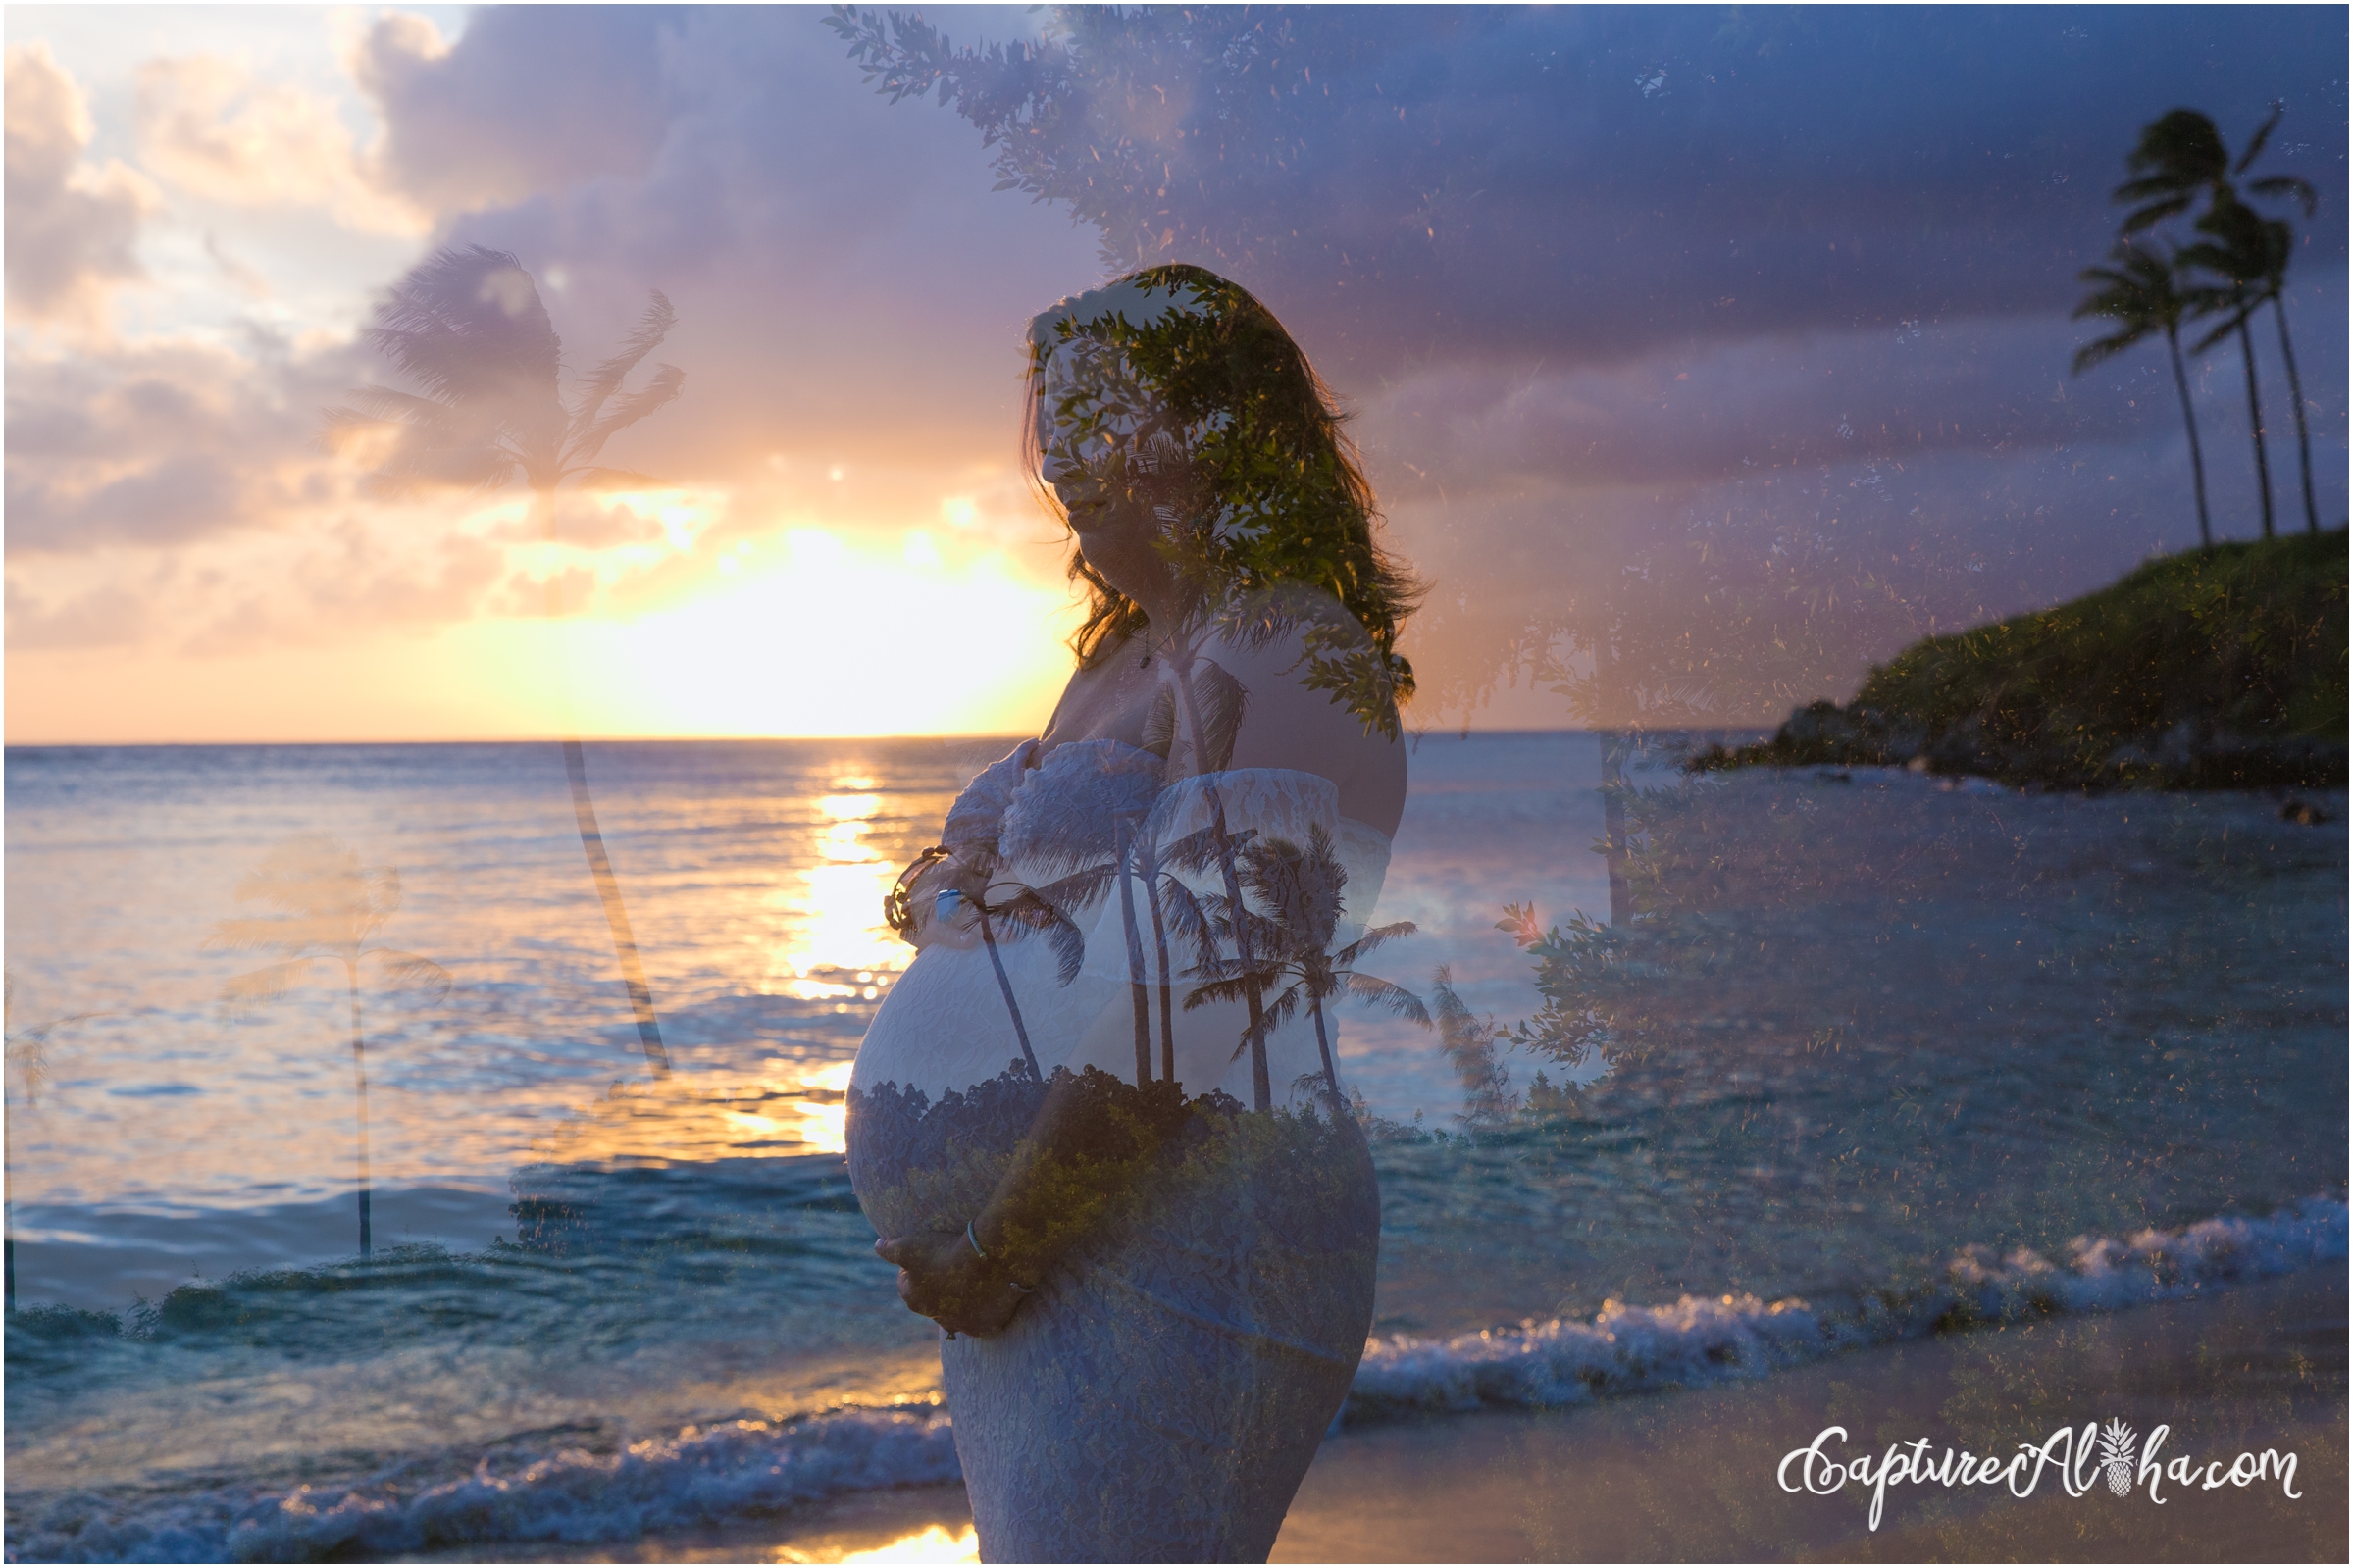 Maui Maternity Photographer at Kapalua Bay with Pregnant woman on the beach in Maui